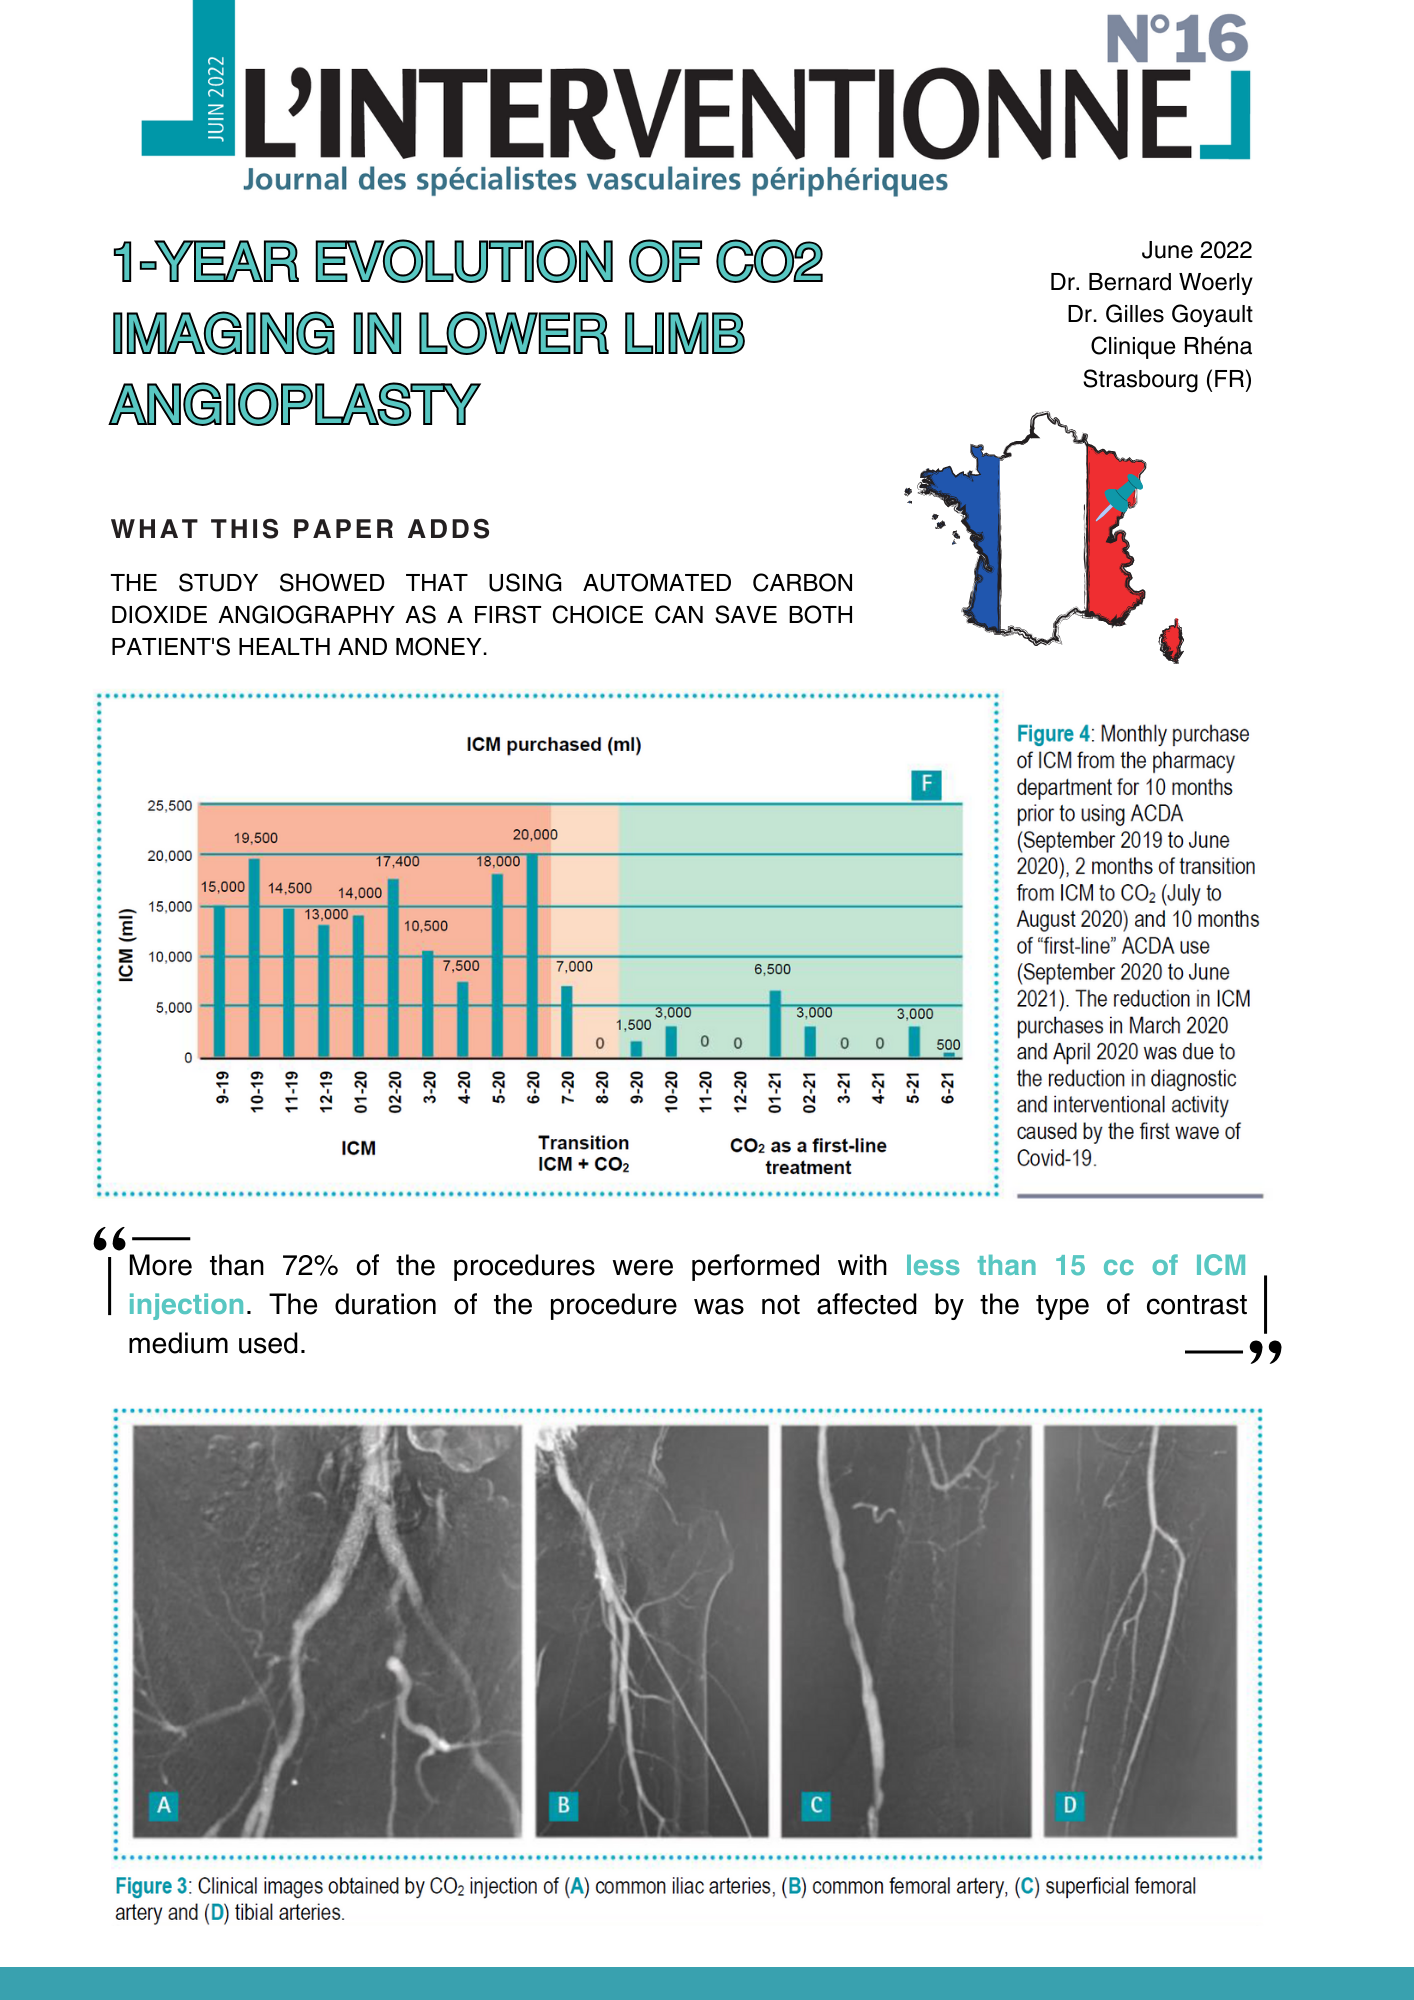 1-year evolution of CO2 imaging in lower limb angioplasty